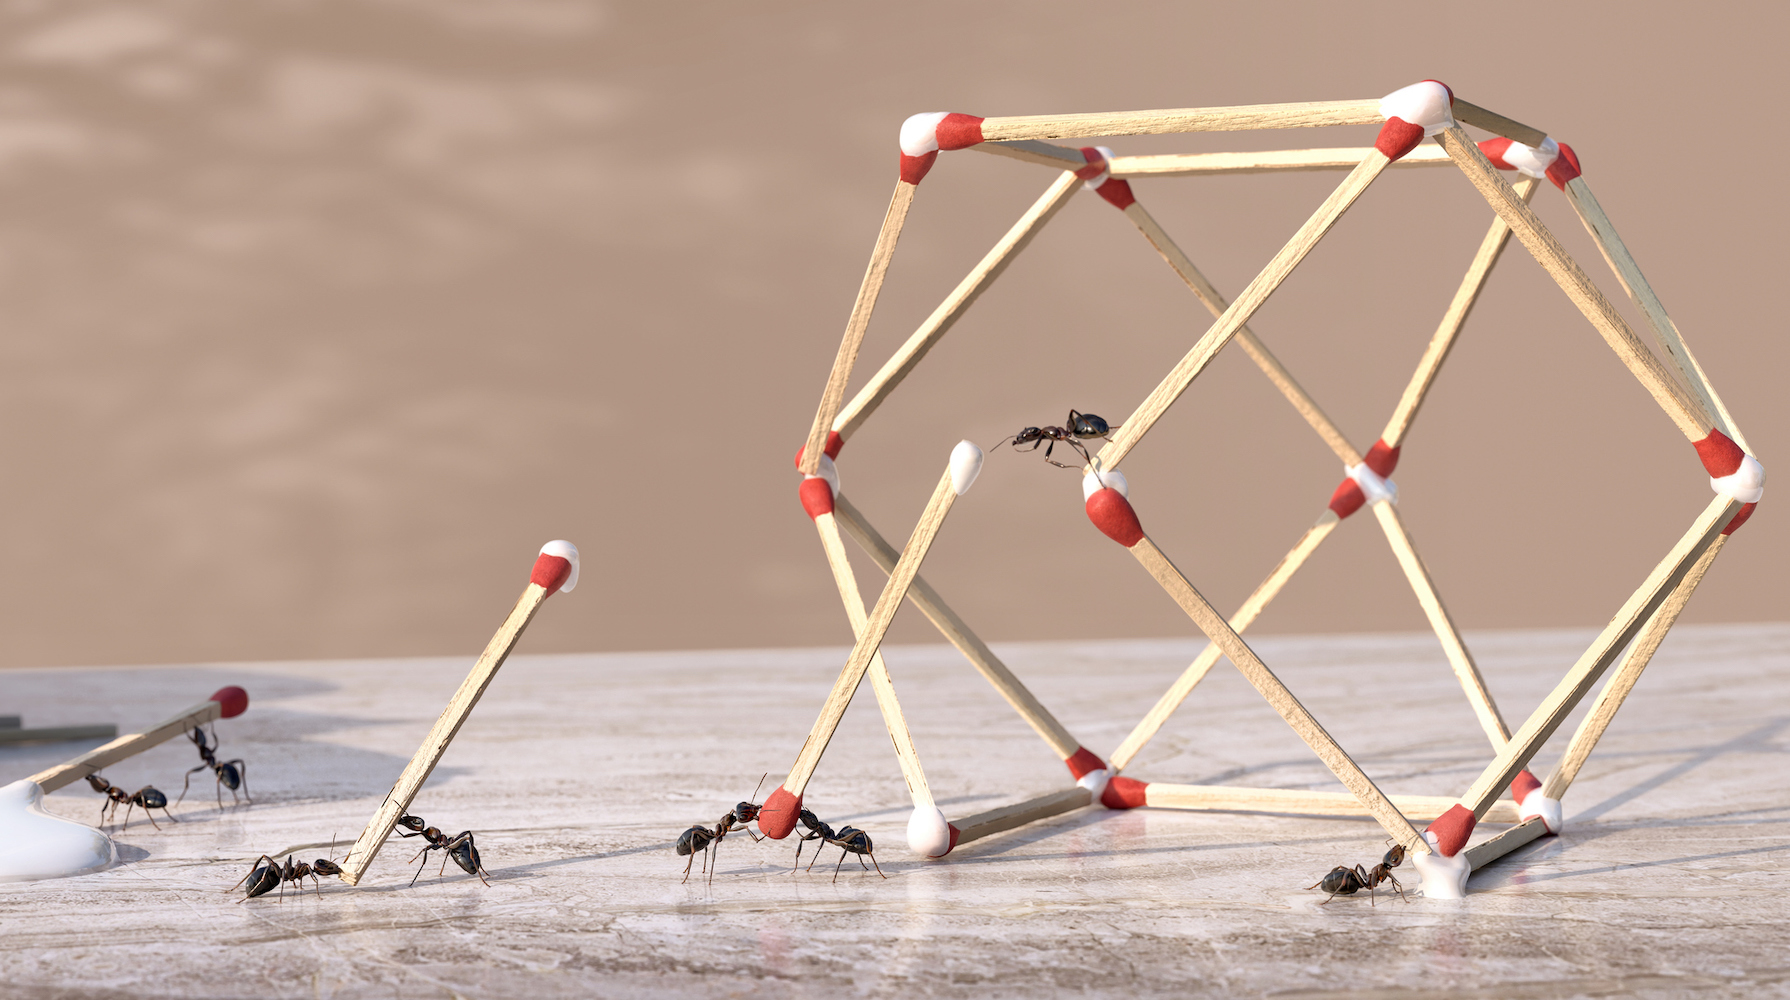 A group of ants work as a team to form a three-dimensional geometric sculpture from glue and matches.  The ants dip the ends of matchsticks in glue dripping from a bottle of glue and are placed in position to form the shape on a marble worktop.